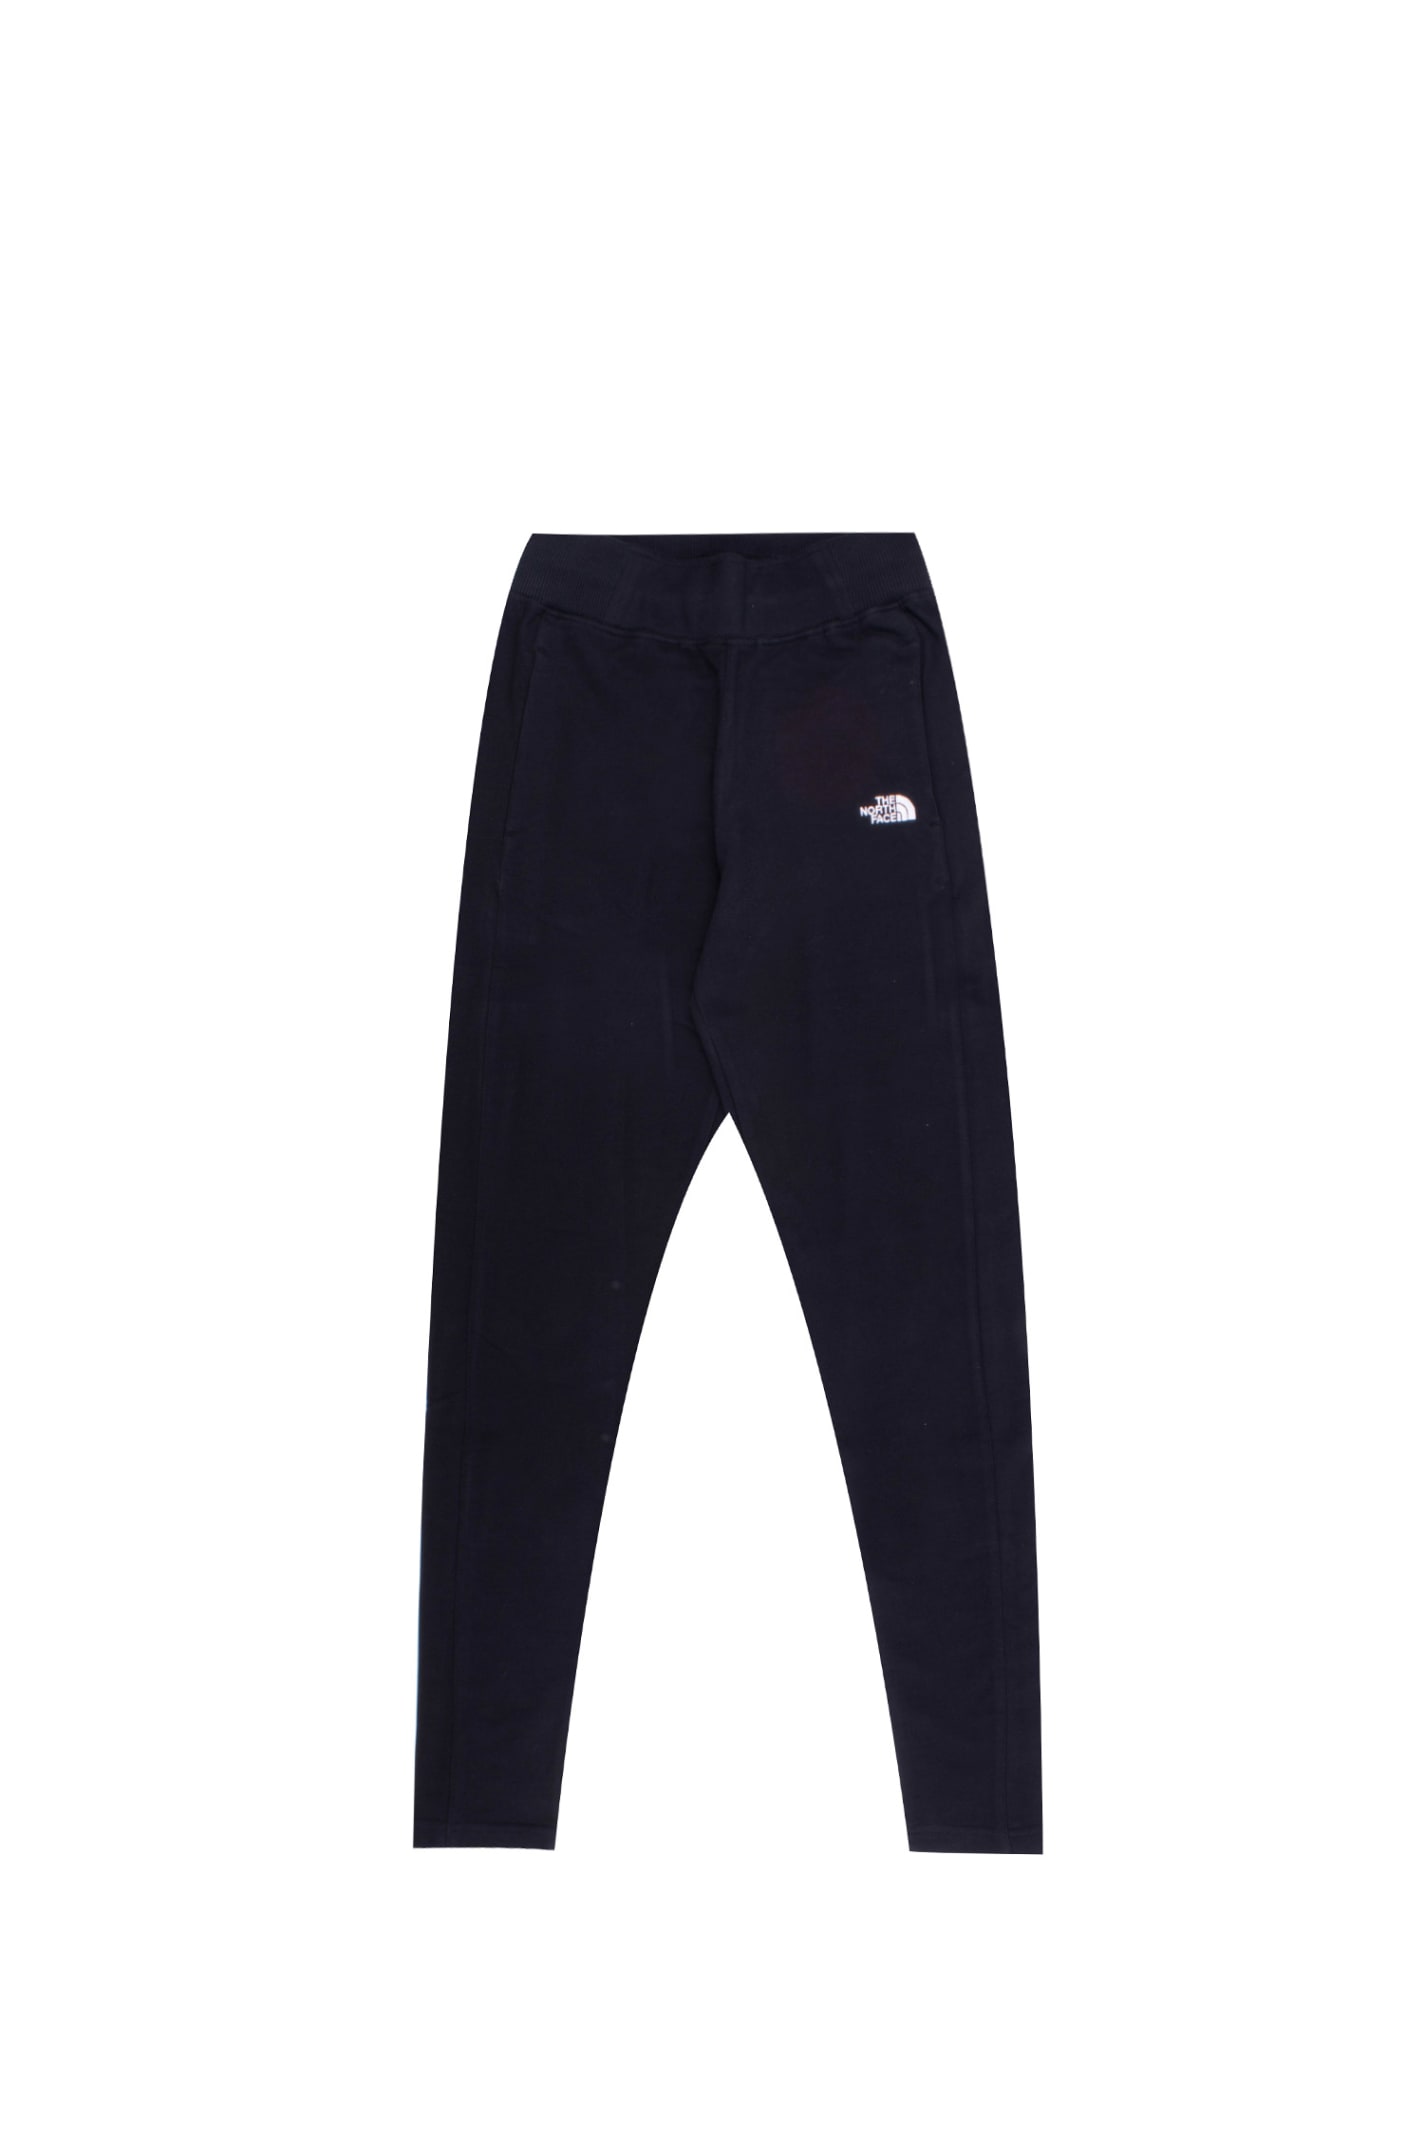 The North Face Cotton Pants